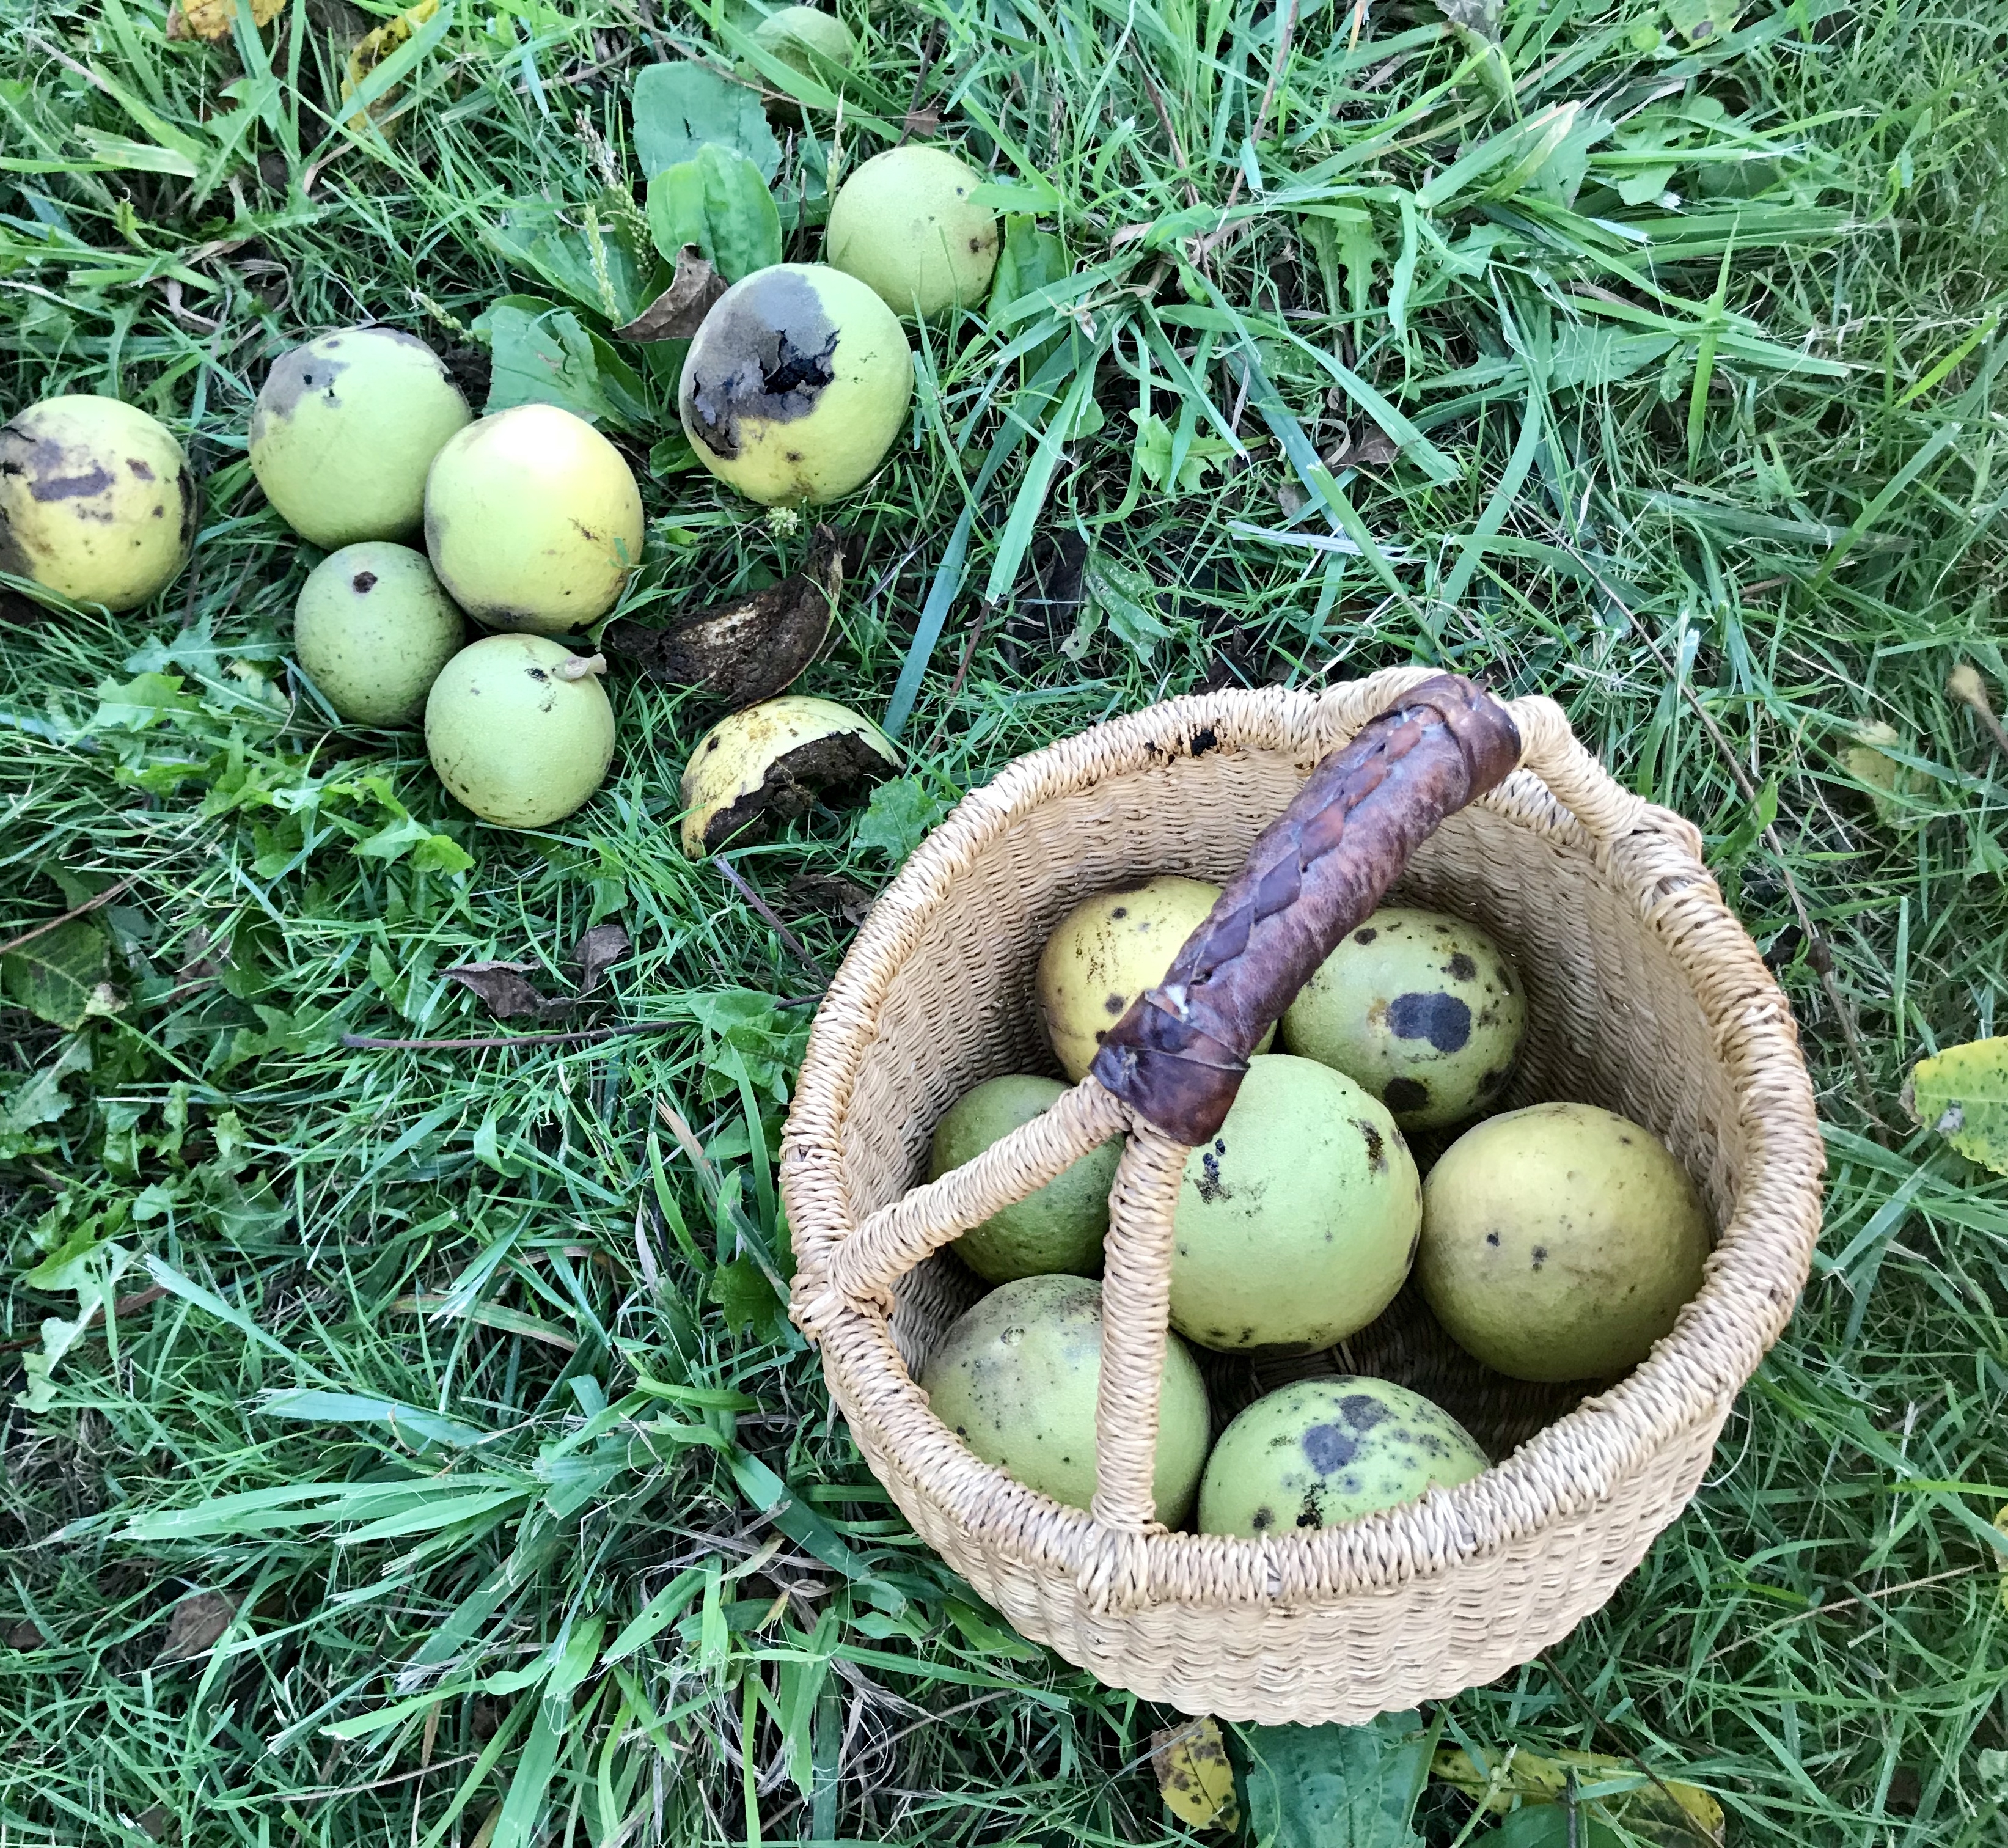 Foraging for black walnuts in Central Park